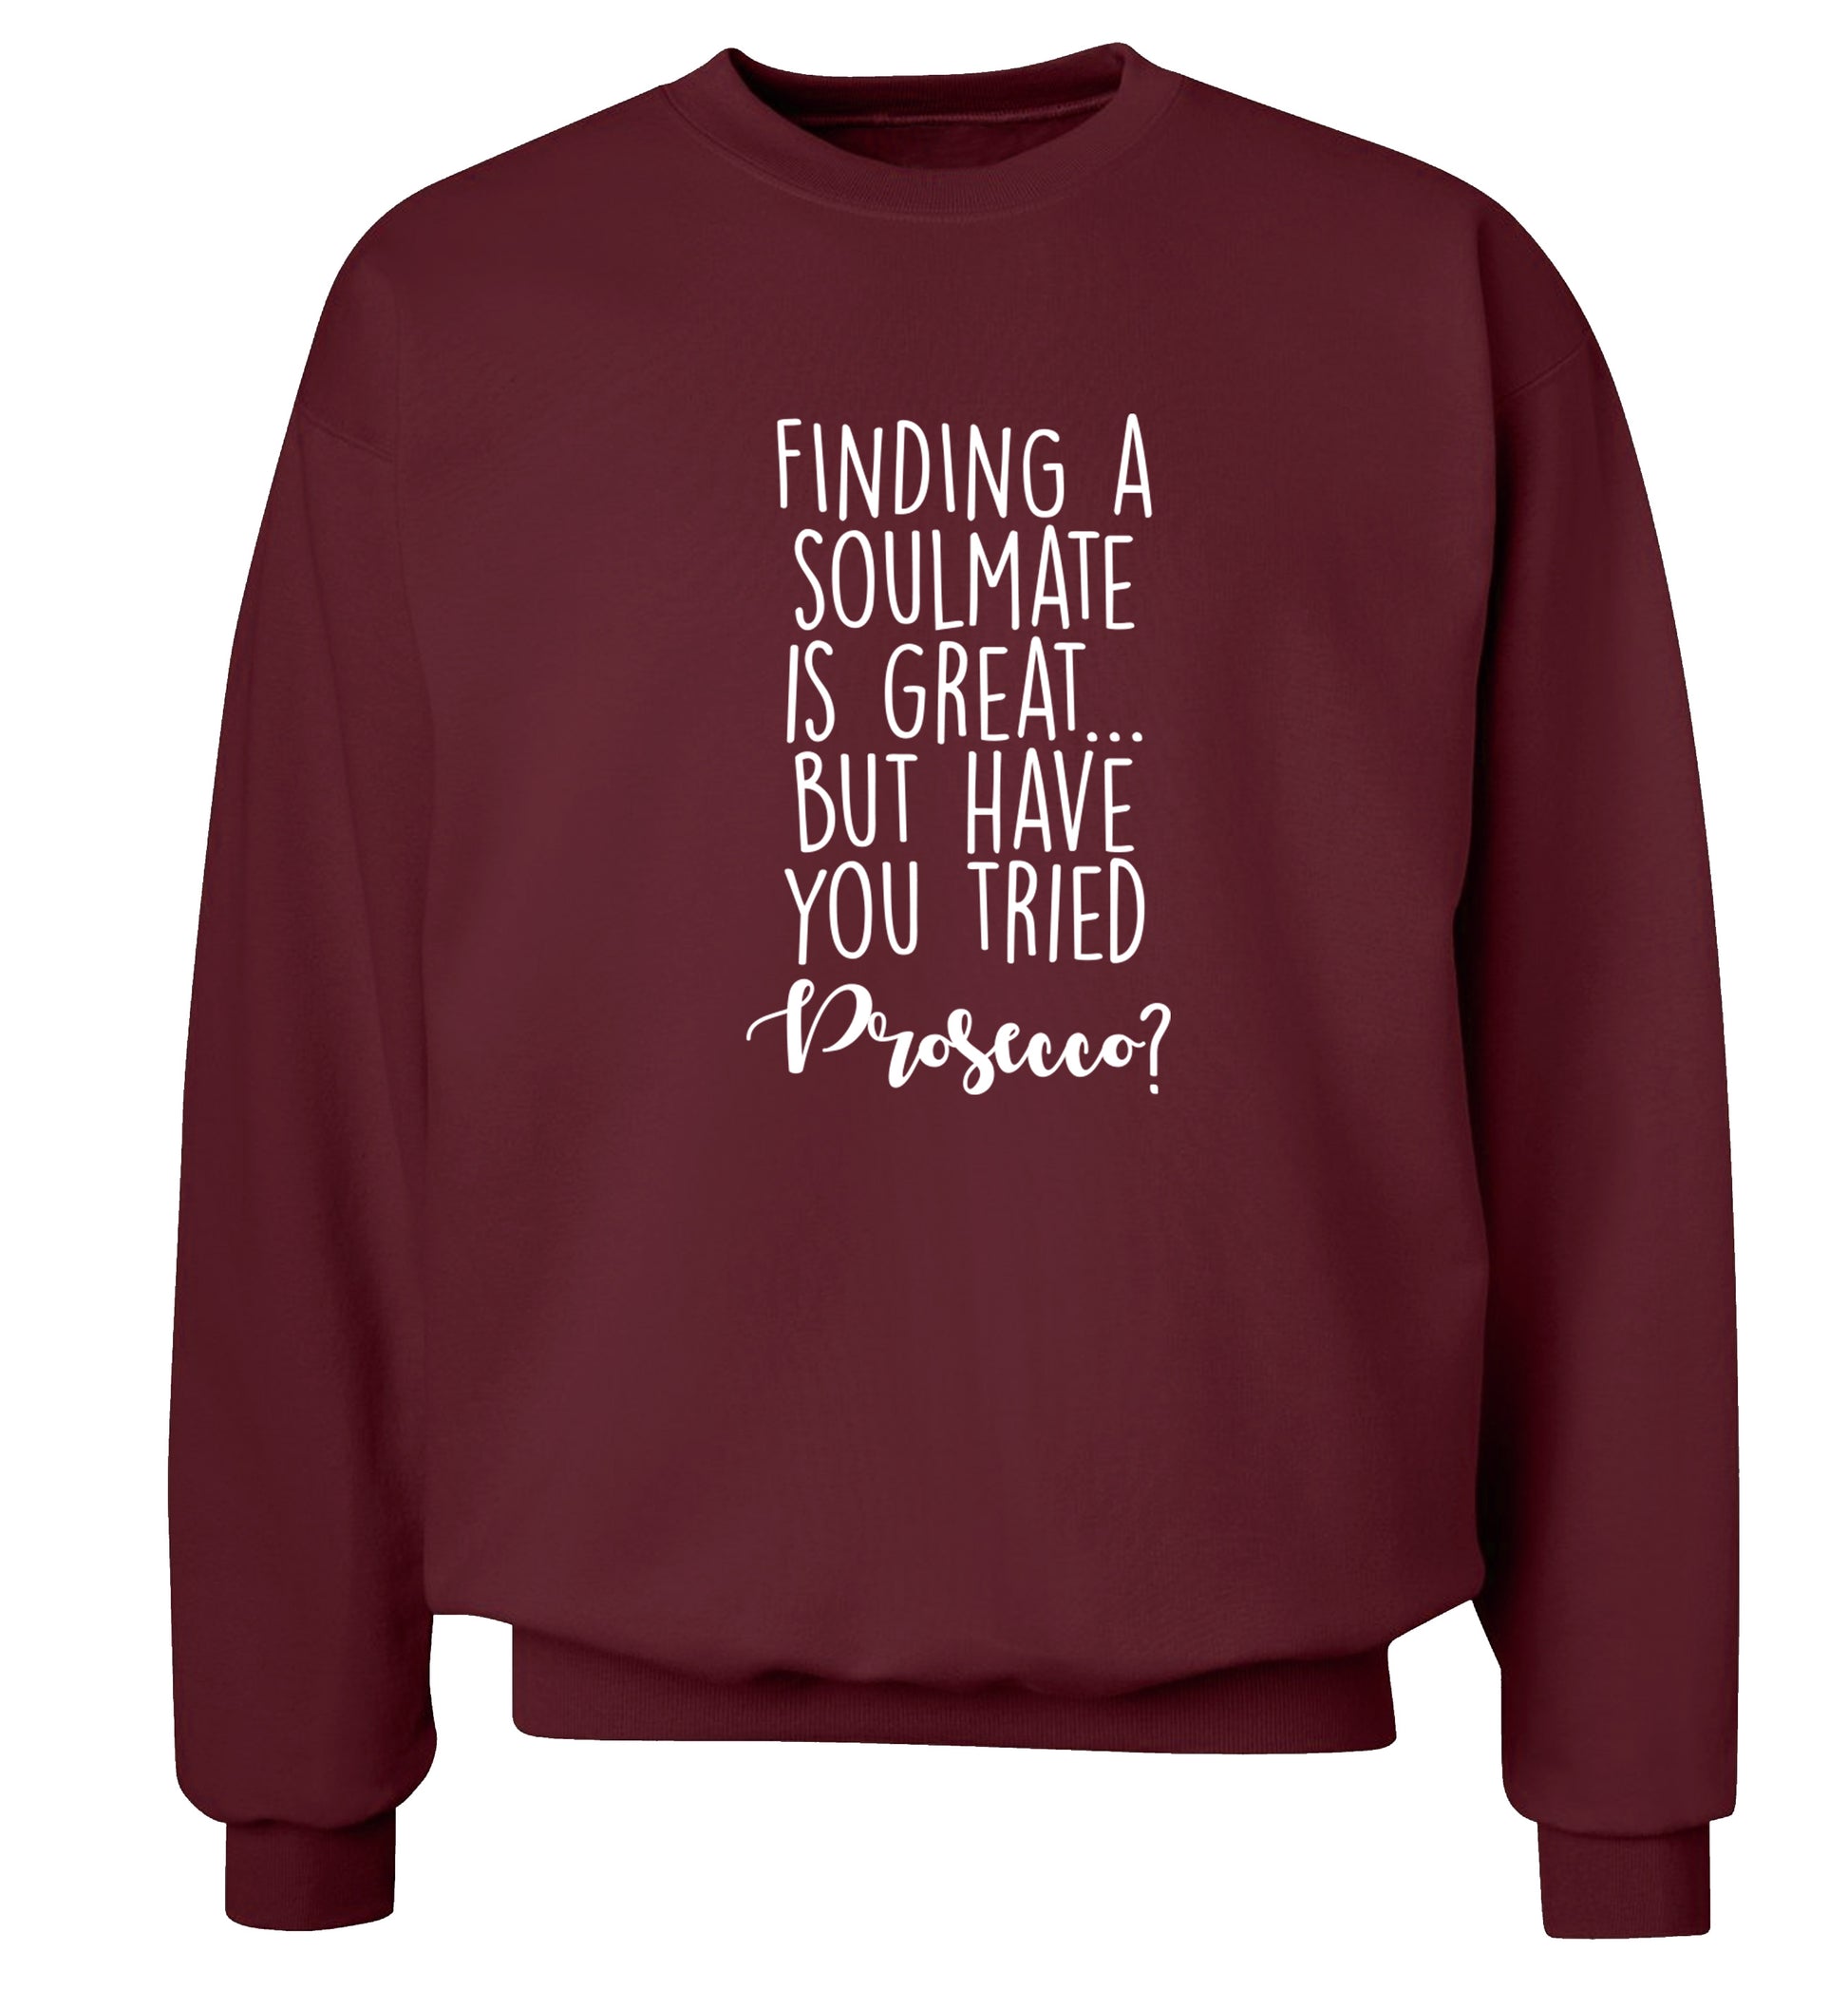 Finding a soulmate is great but have you tried prosecco? Adult's unisex maroon Sweater 2XL